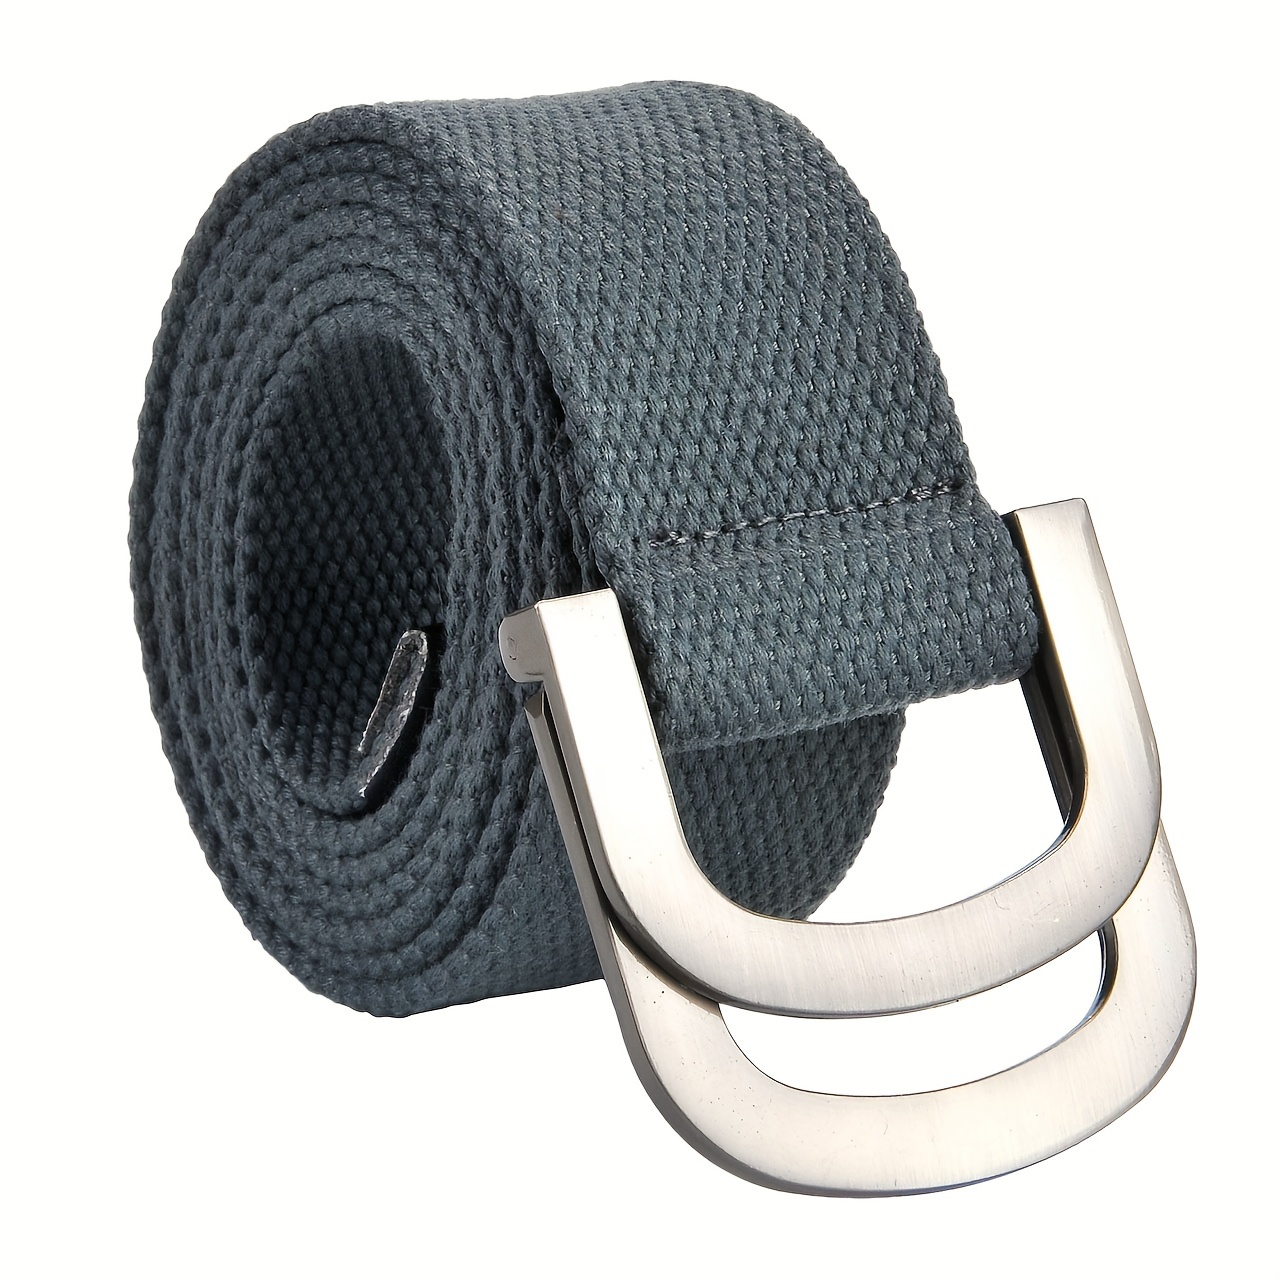 Unisex Classic Alloy Double Ring D Shaped Buckle Belt Casual